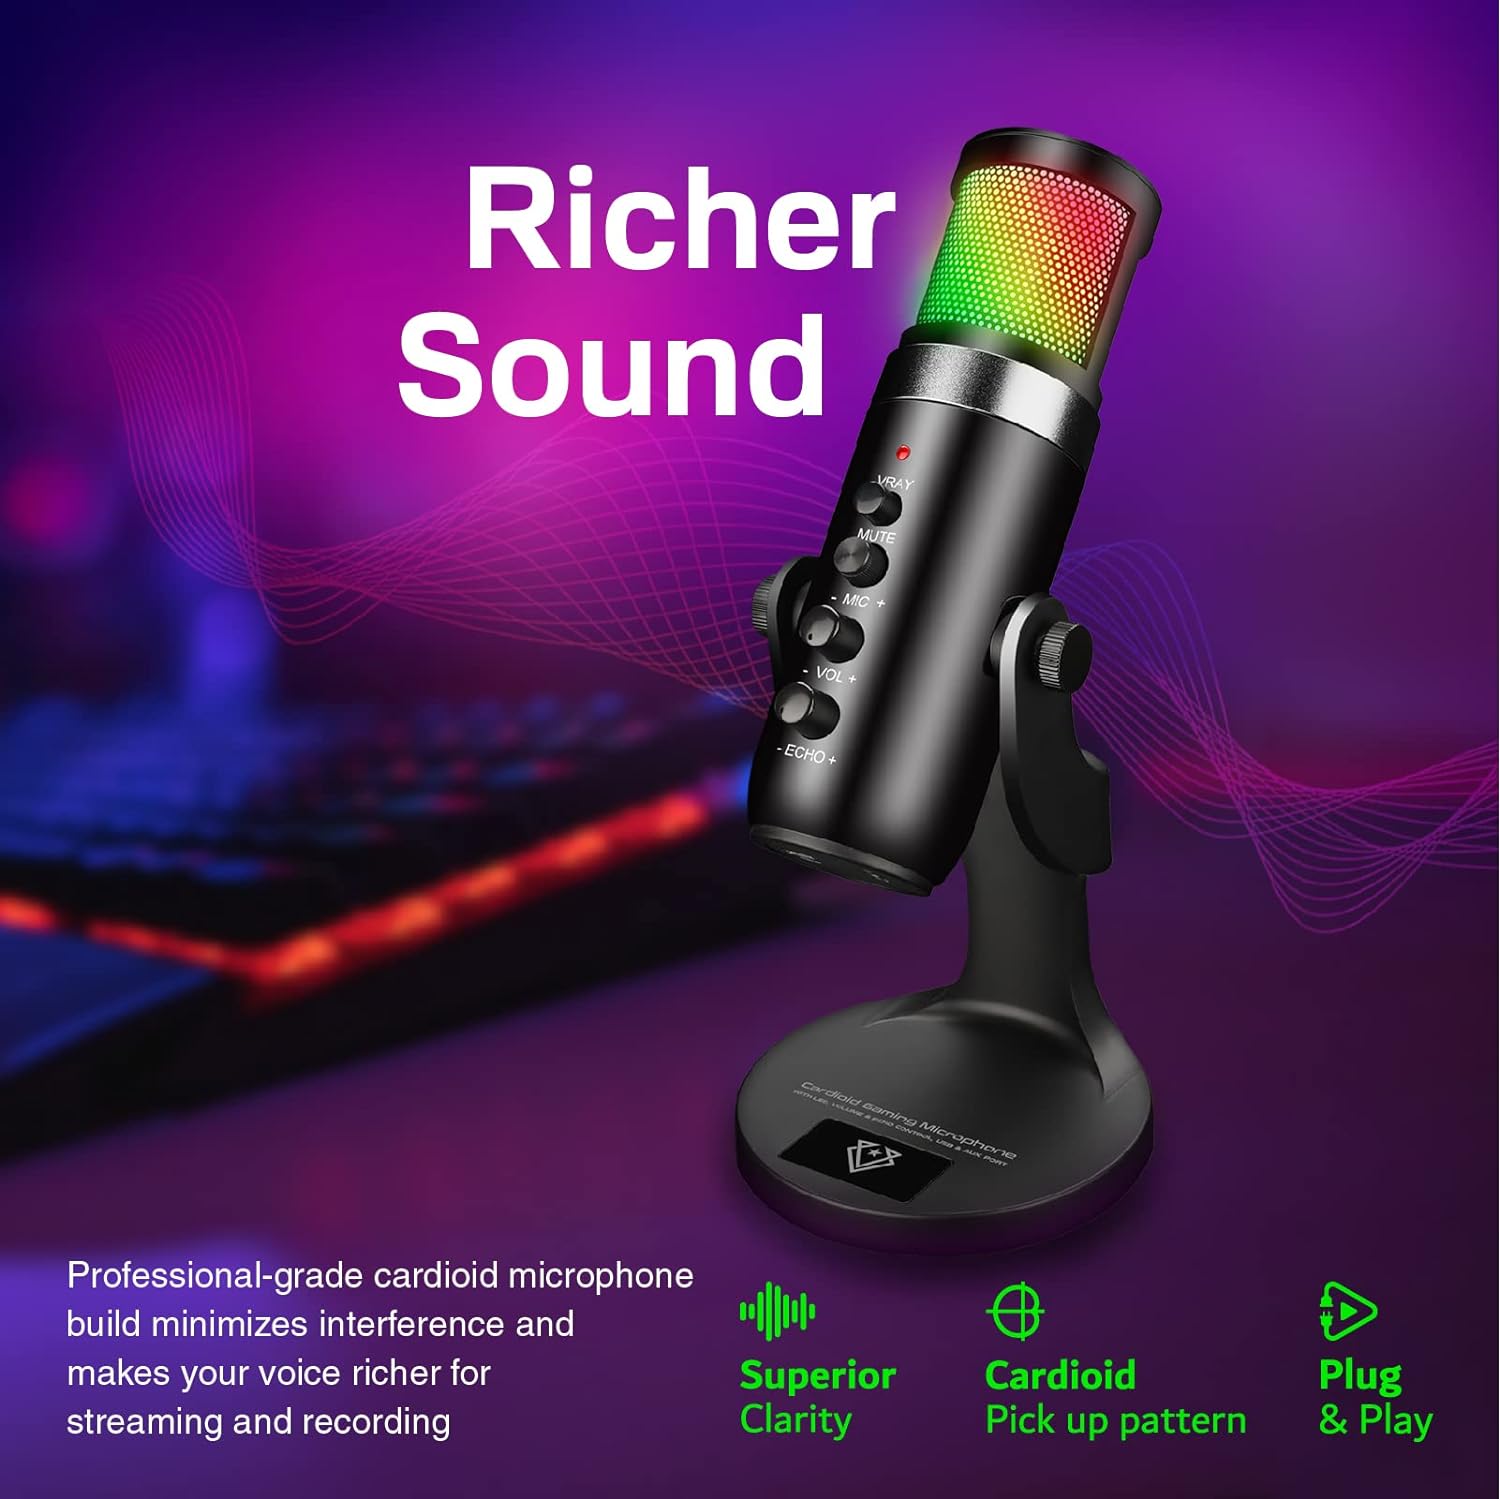 Vertux Unidirectional Hyper Sensitive Cardioid Gaming Microphone USB Condenser Gaming Microphone | [2 Years-Warranty] PC, PS4 and Mac | Multi LED Light Effect - Black